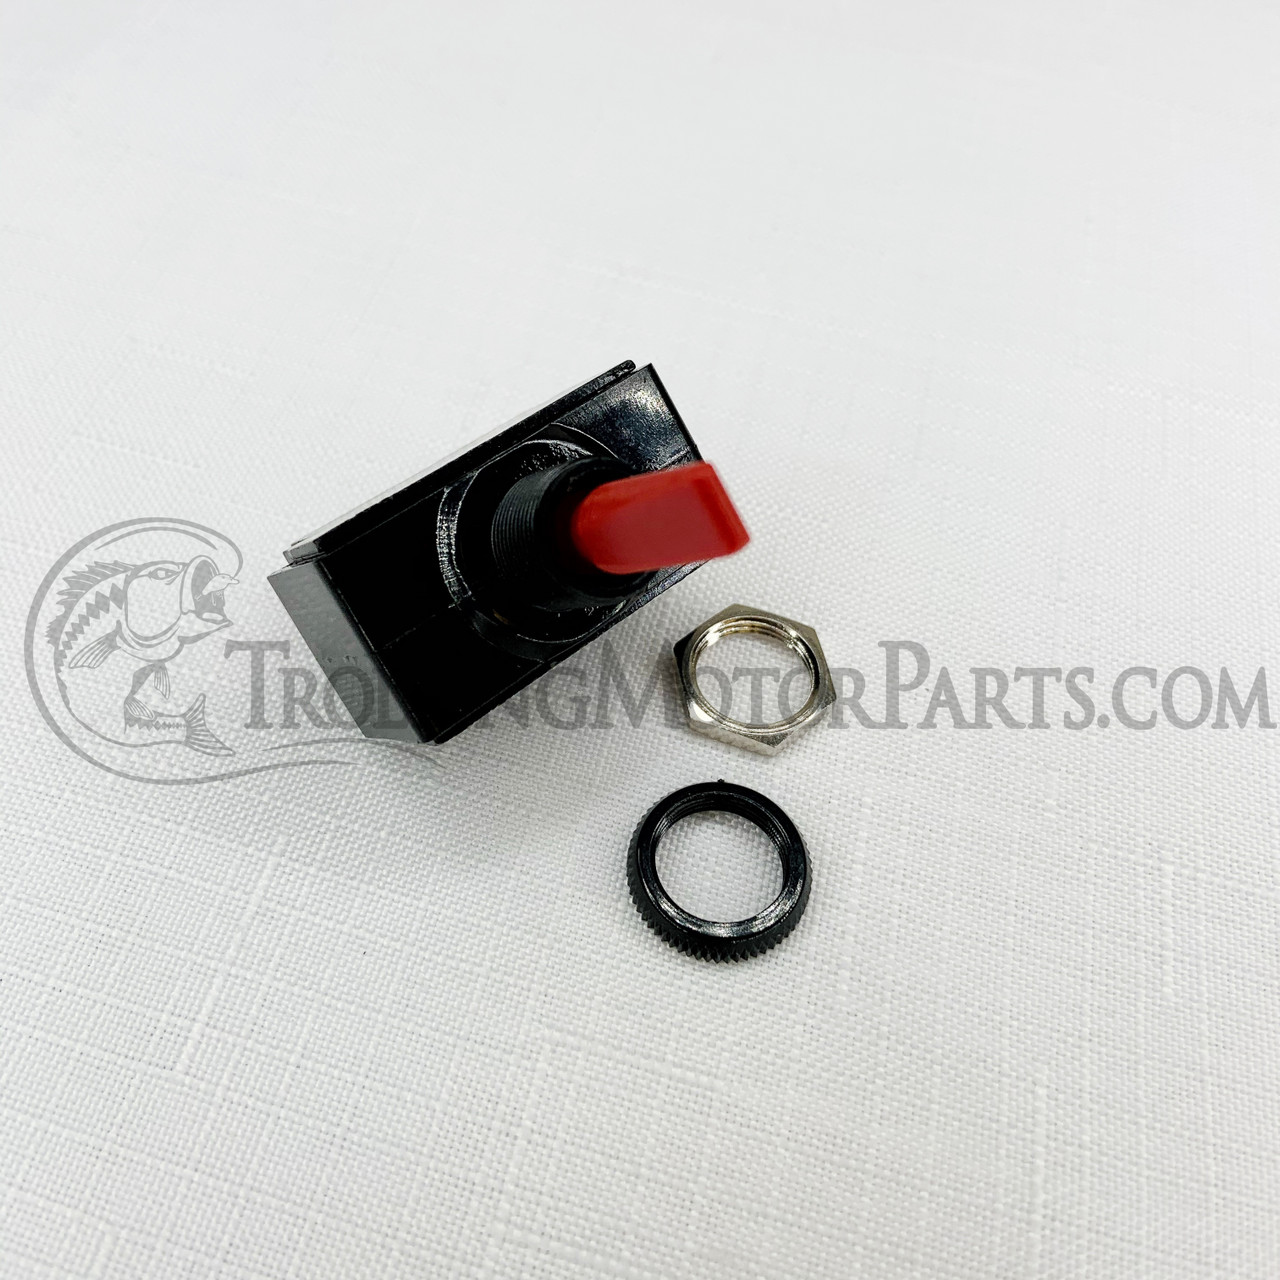 Motor Guide Toggle Switch